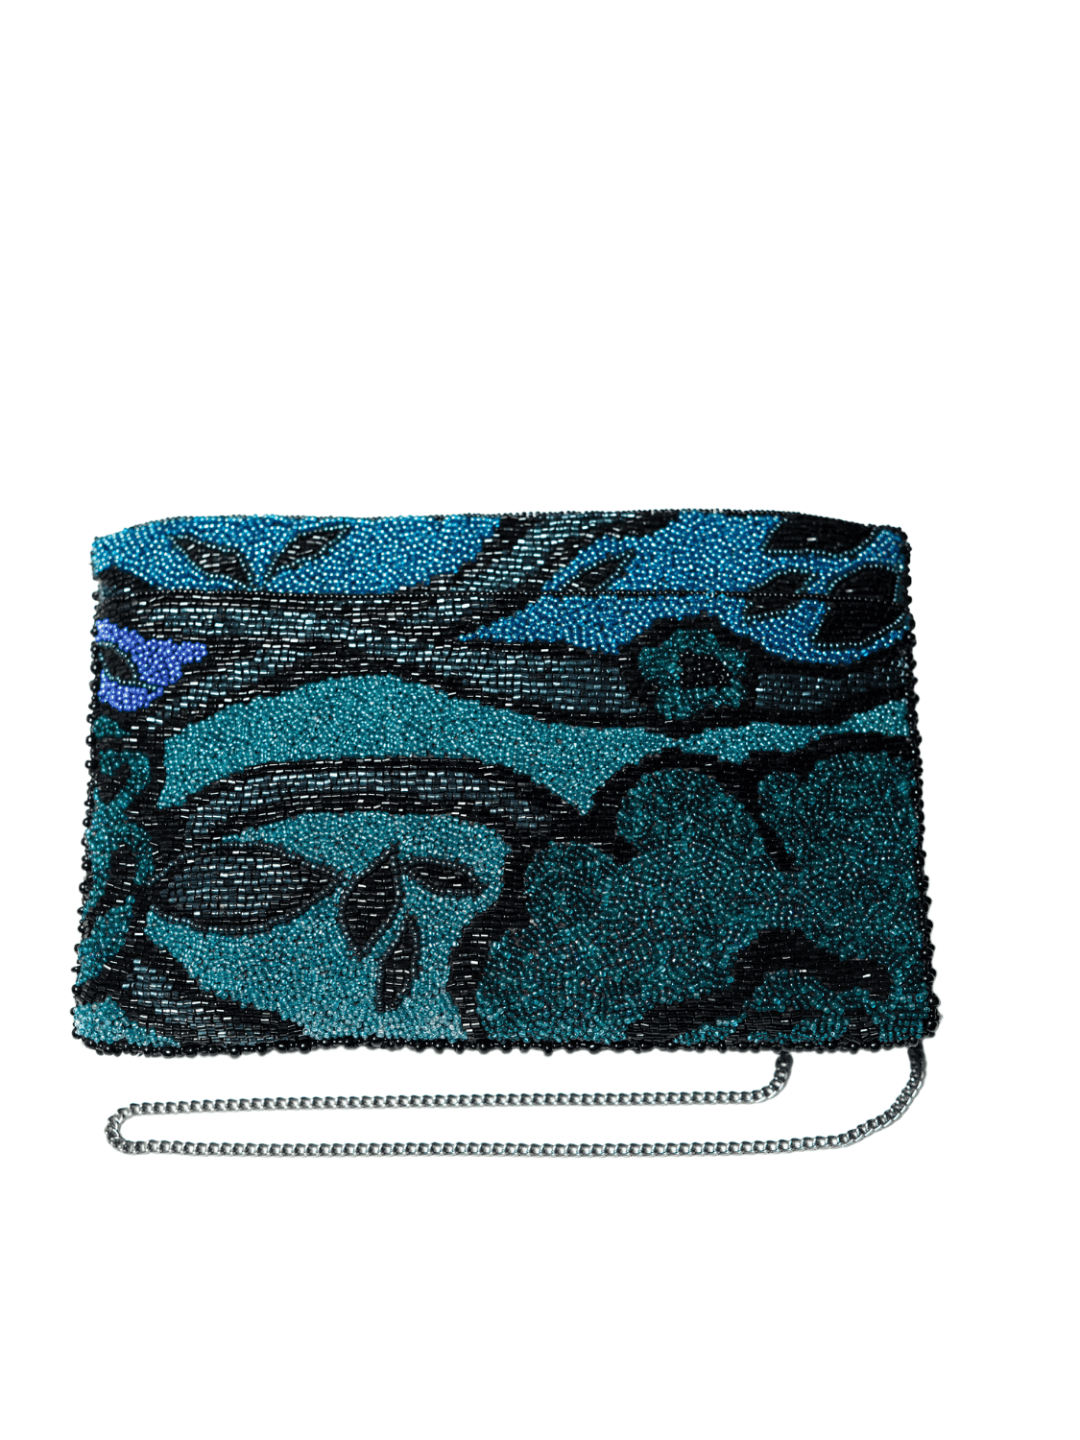 Beaded Blue Clutch Party Bag - QUEENS JEWELS